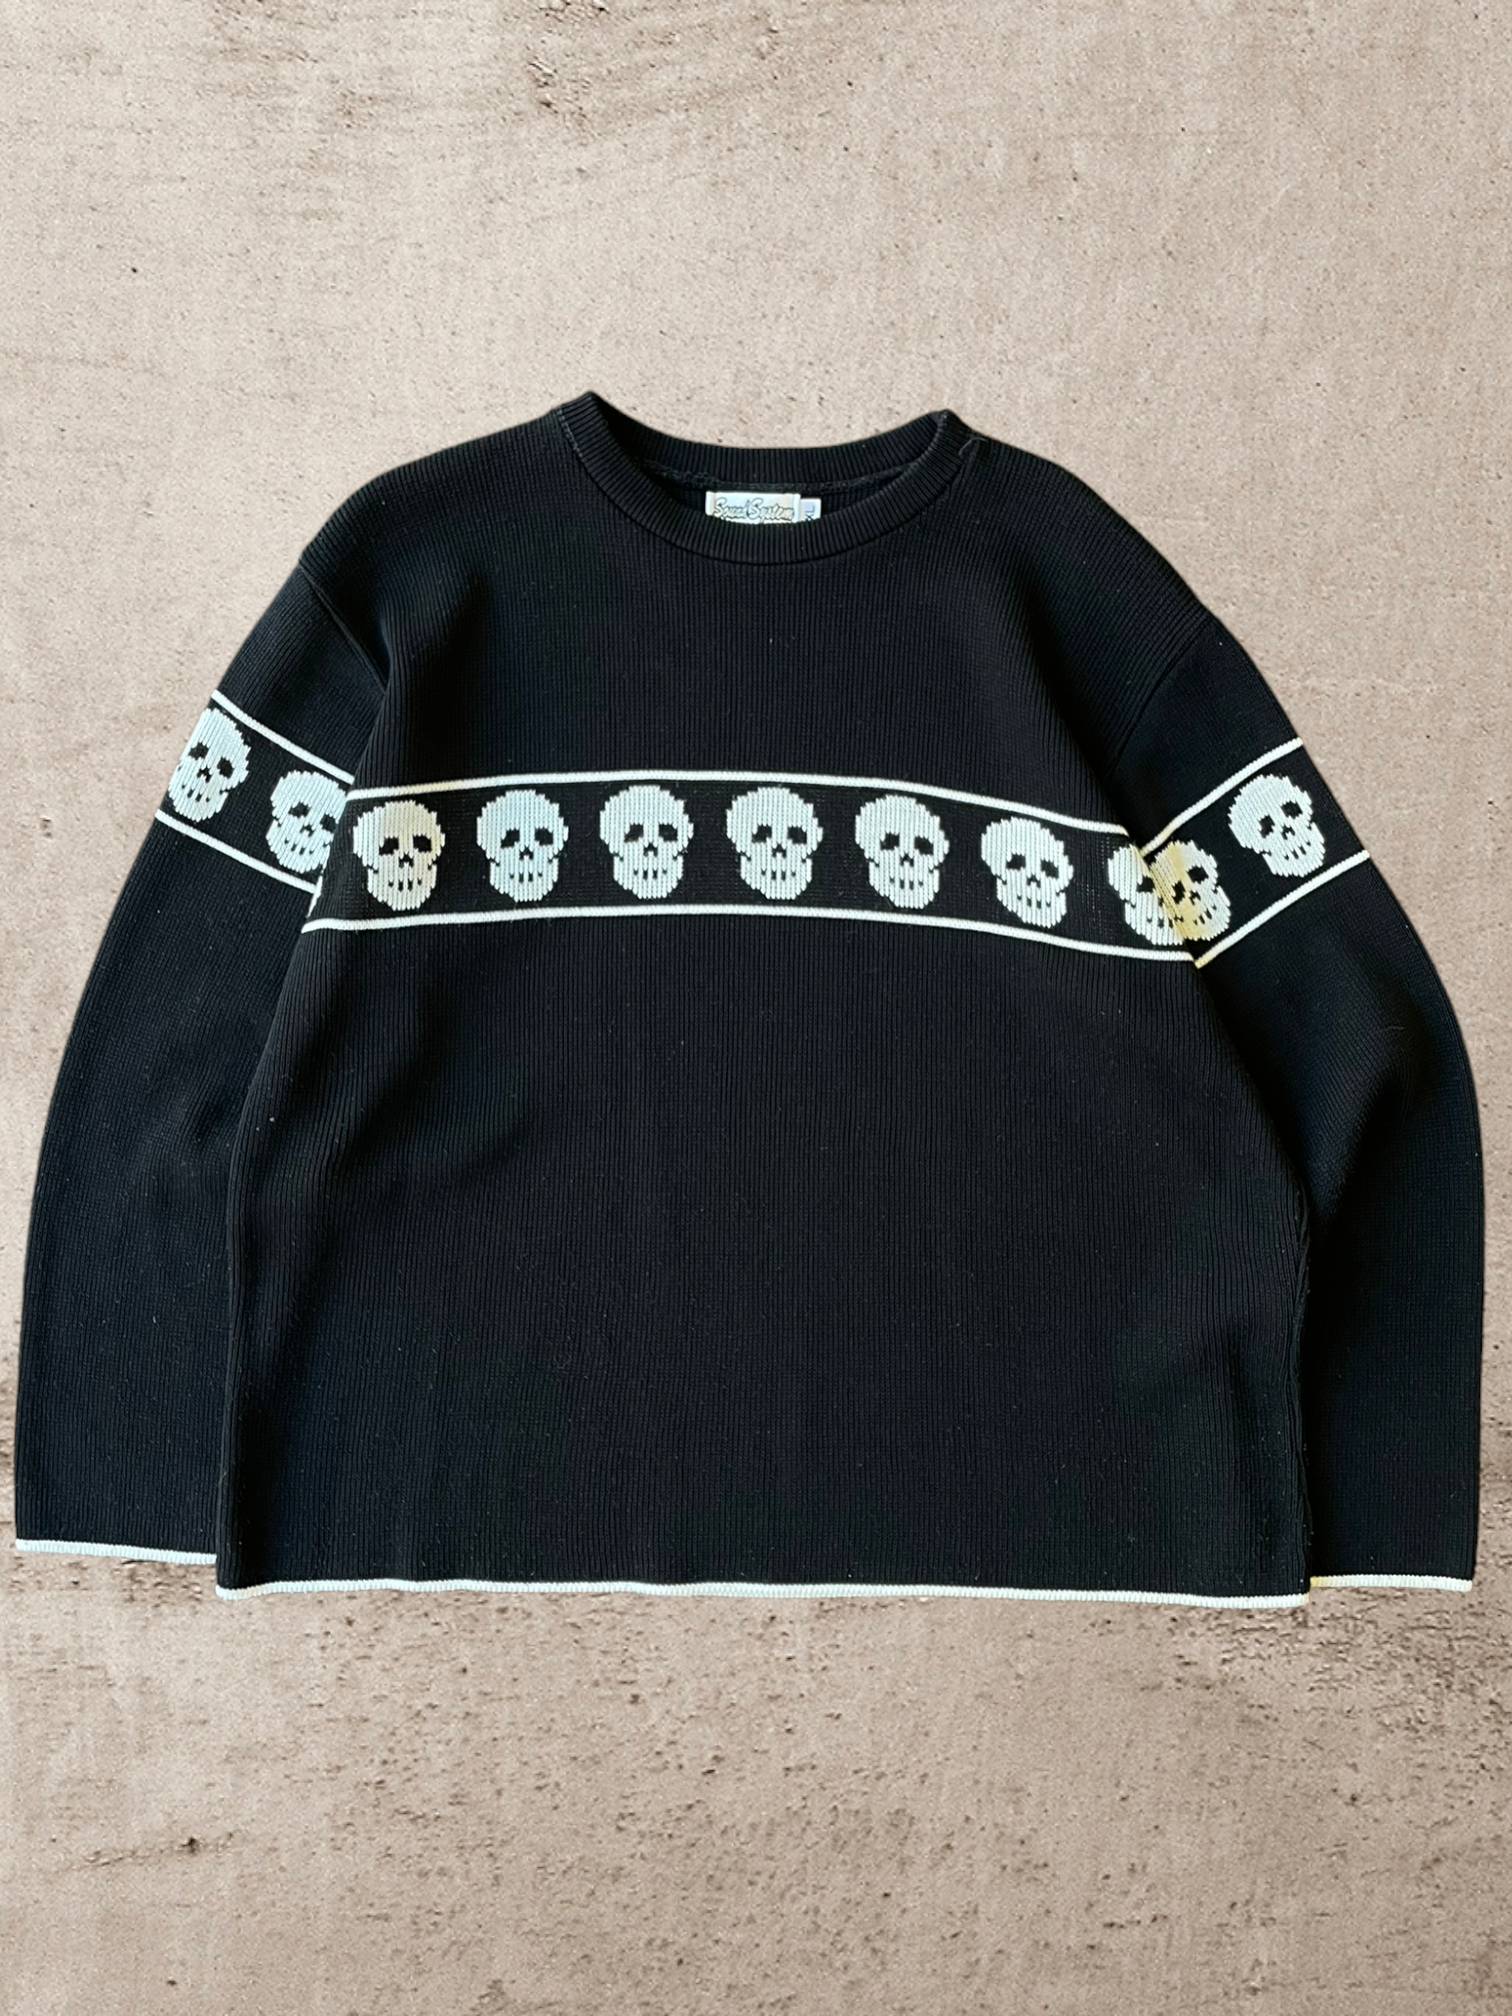 90s Skull Knit Sweater - Large